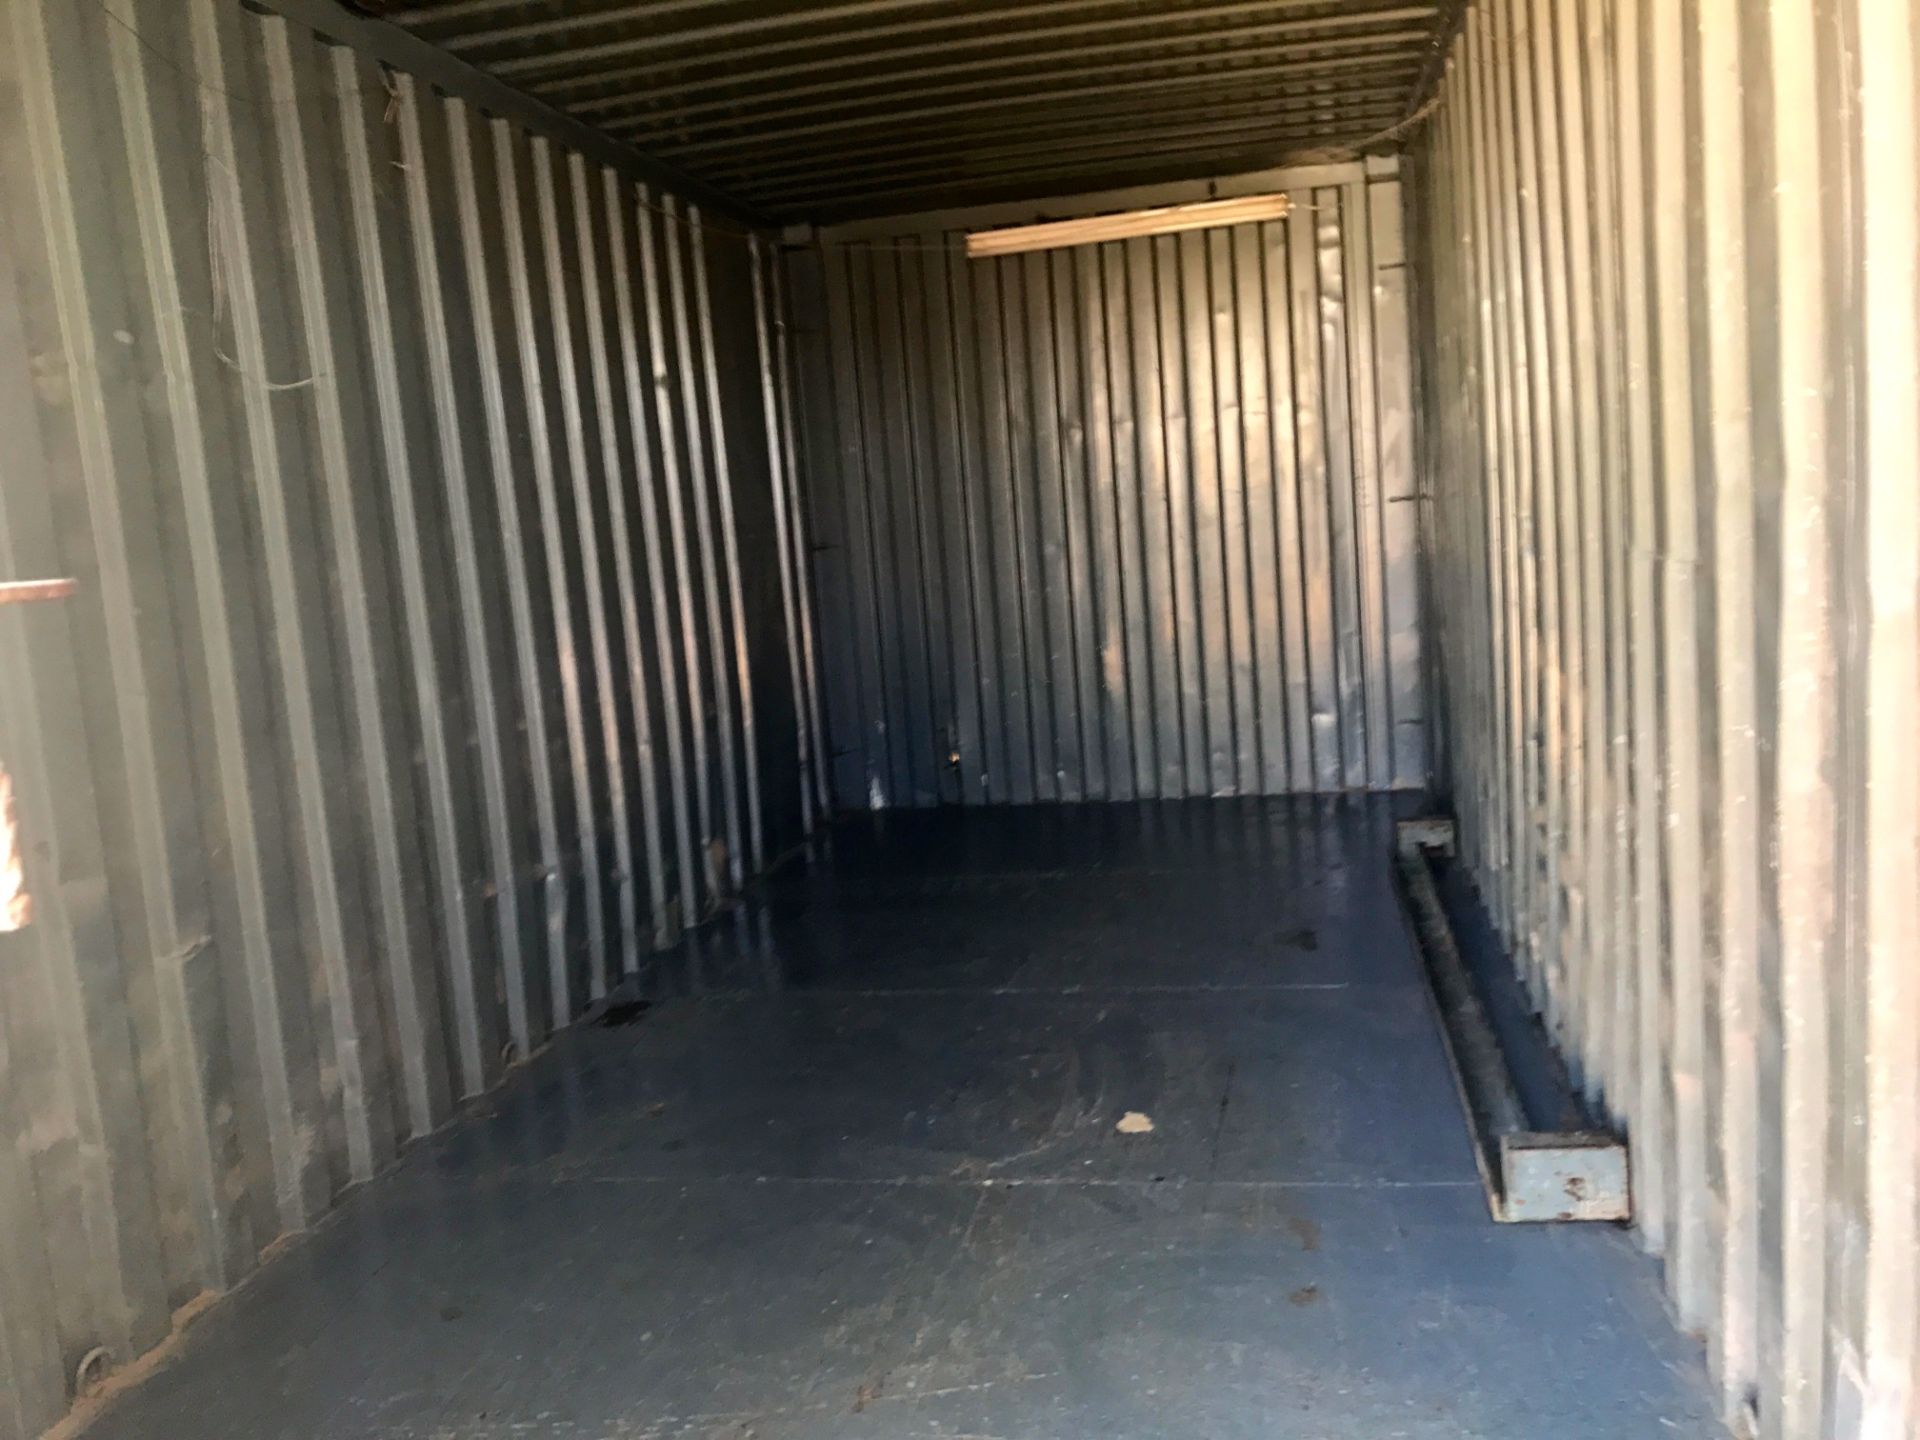 CONTAINER OFFICE - () - Image 2 of 3